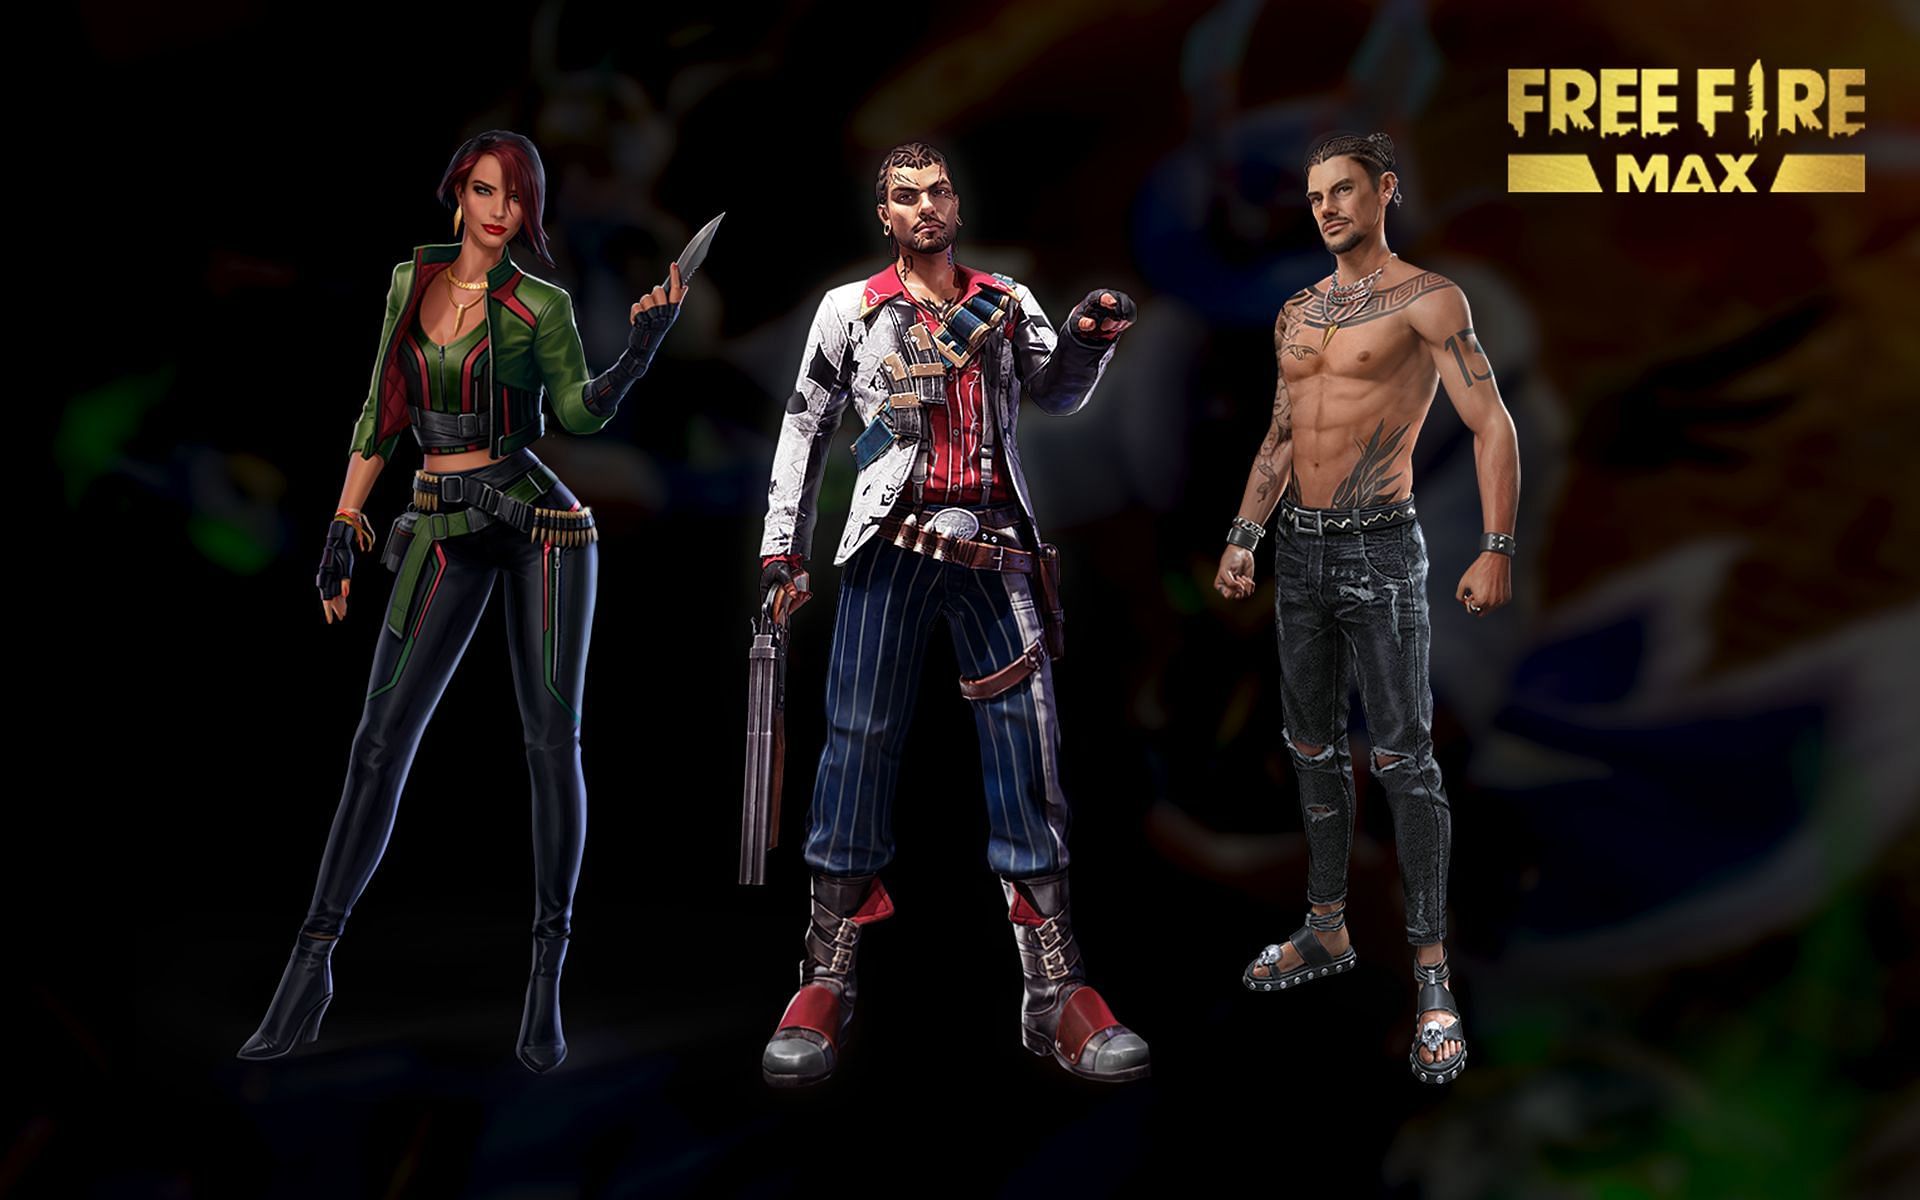 Free Fire MAX characters that deserve a buff (Image via Sportskeeda)